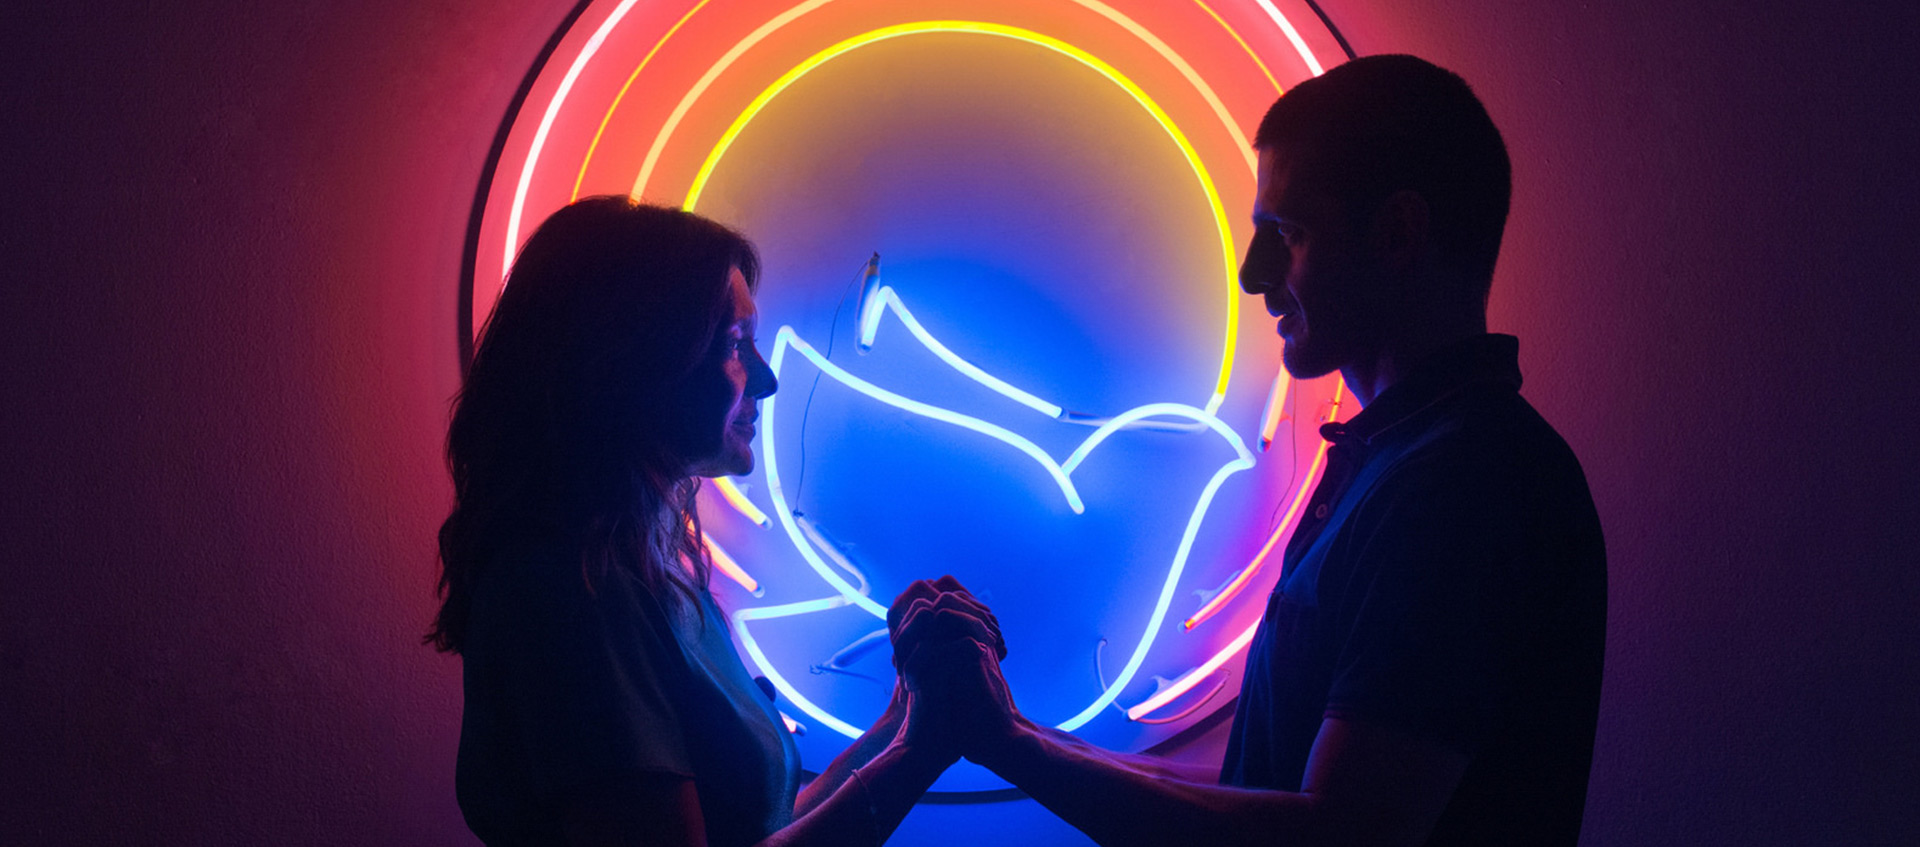 Two silhouettes, a woman on the left and a man on the right, holding hands, standing in front of a neon circle that features a blue neon dove in the center